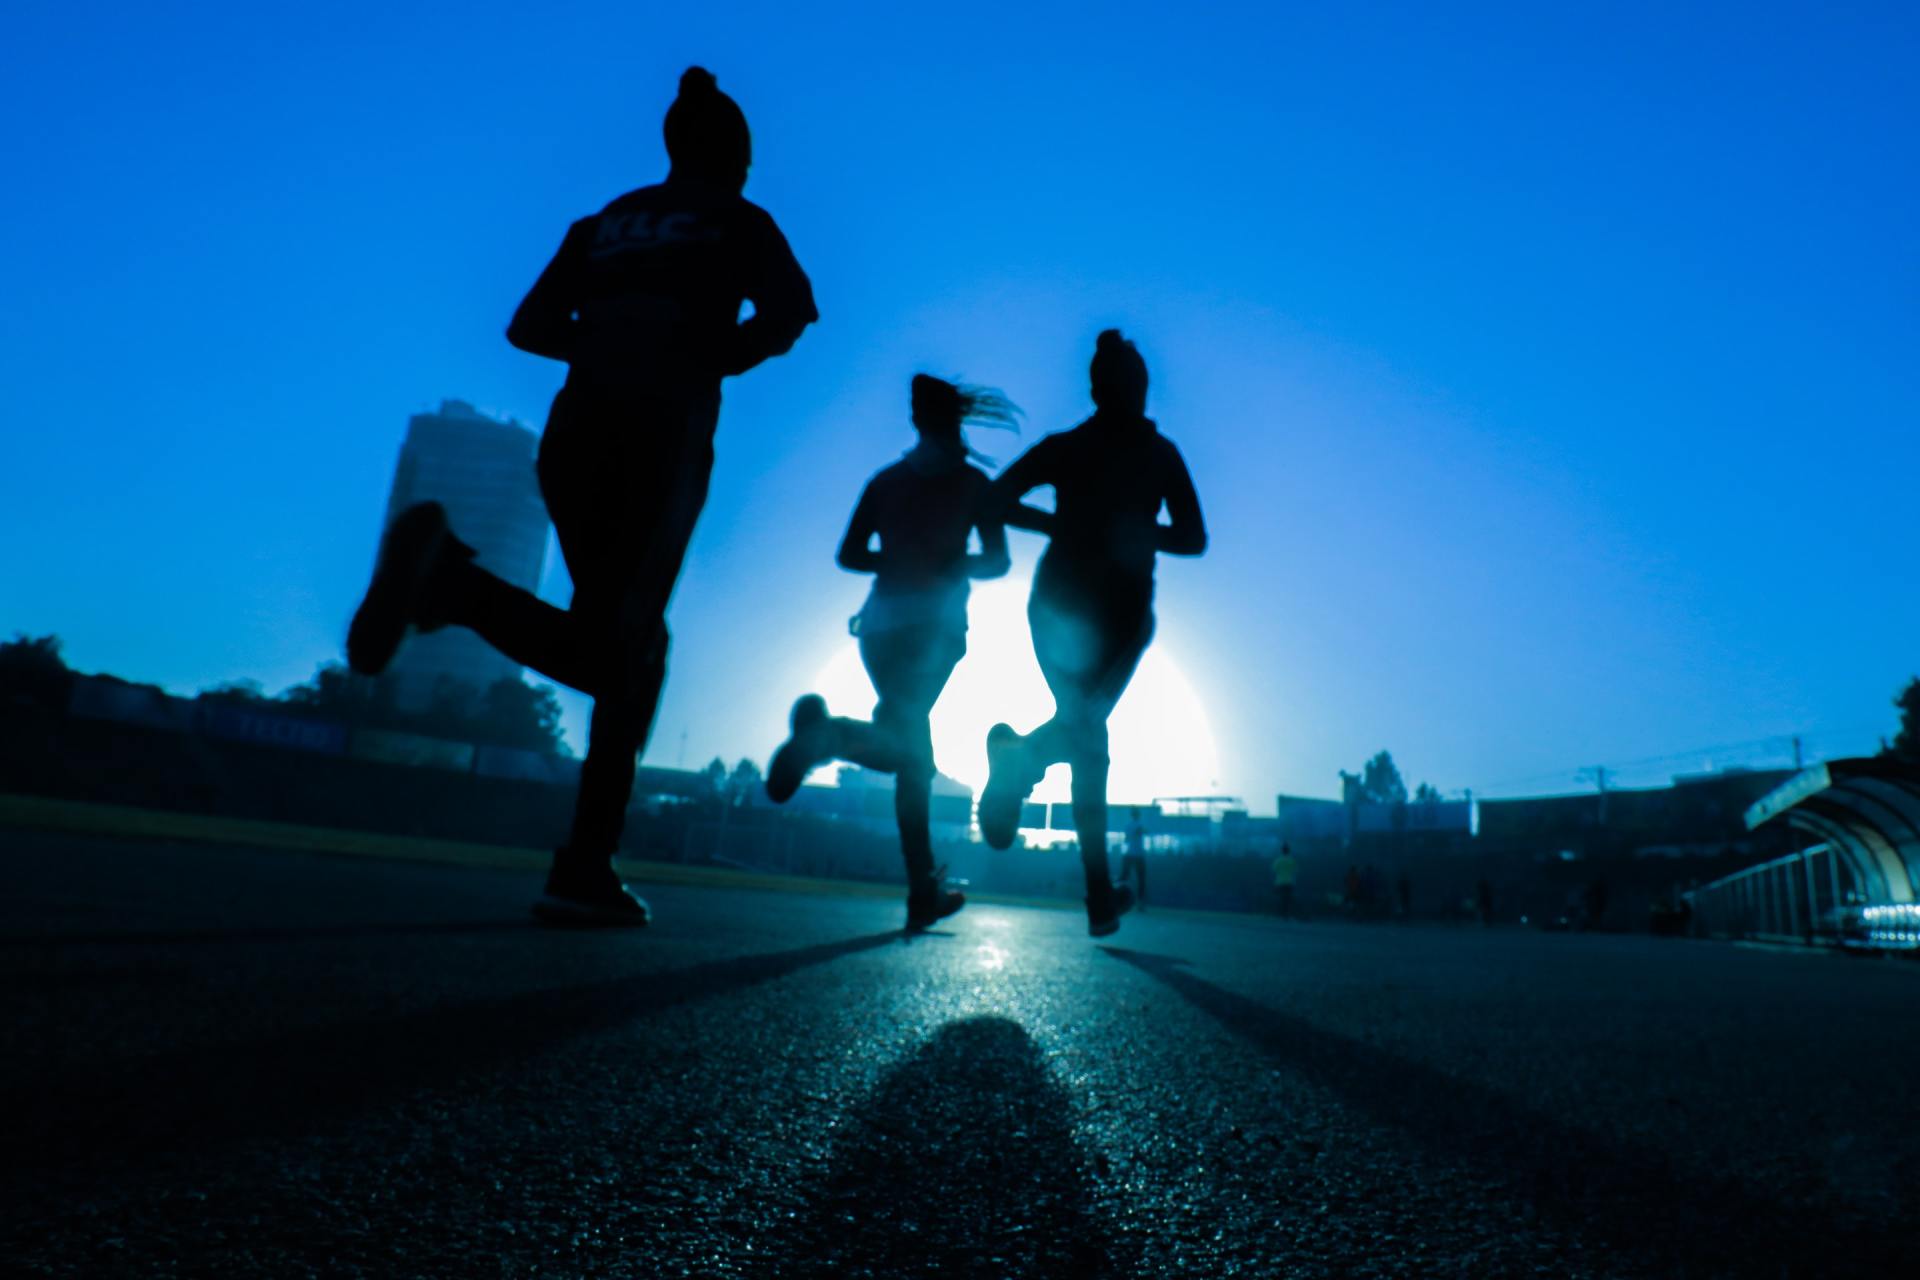 Runners in the early light of day